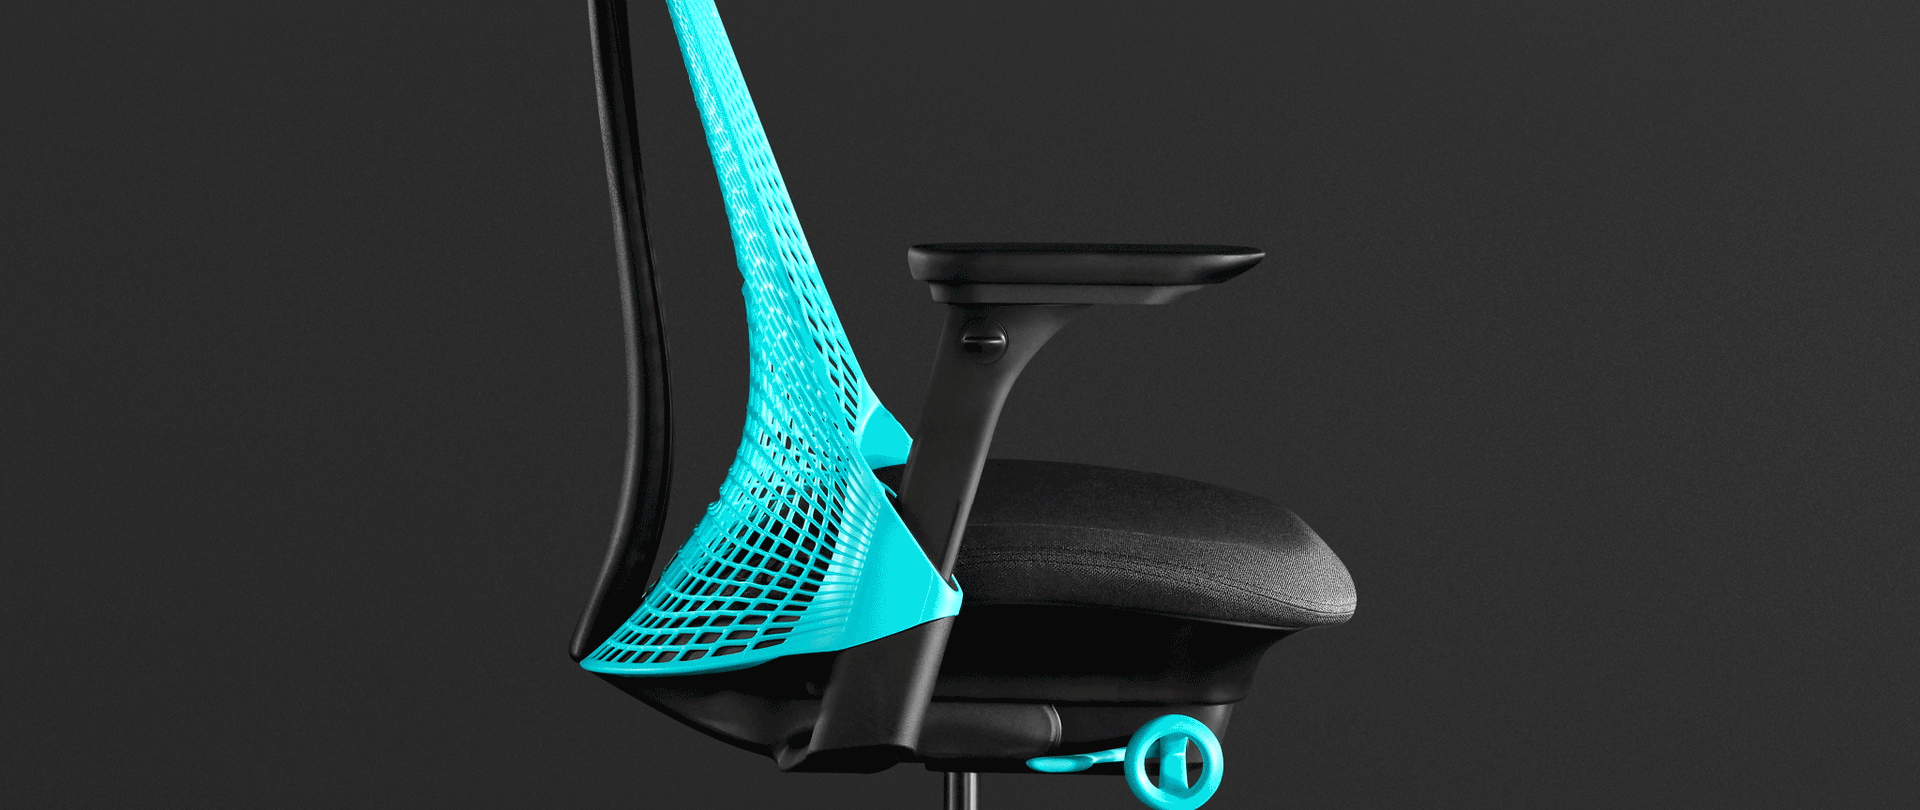 An animation over a photograph of the Sayl Chair in ocean deep highlights the benefits of its PostureFit Spinal Support.